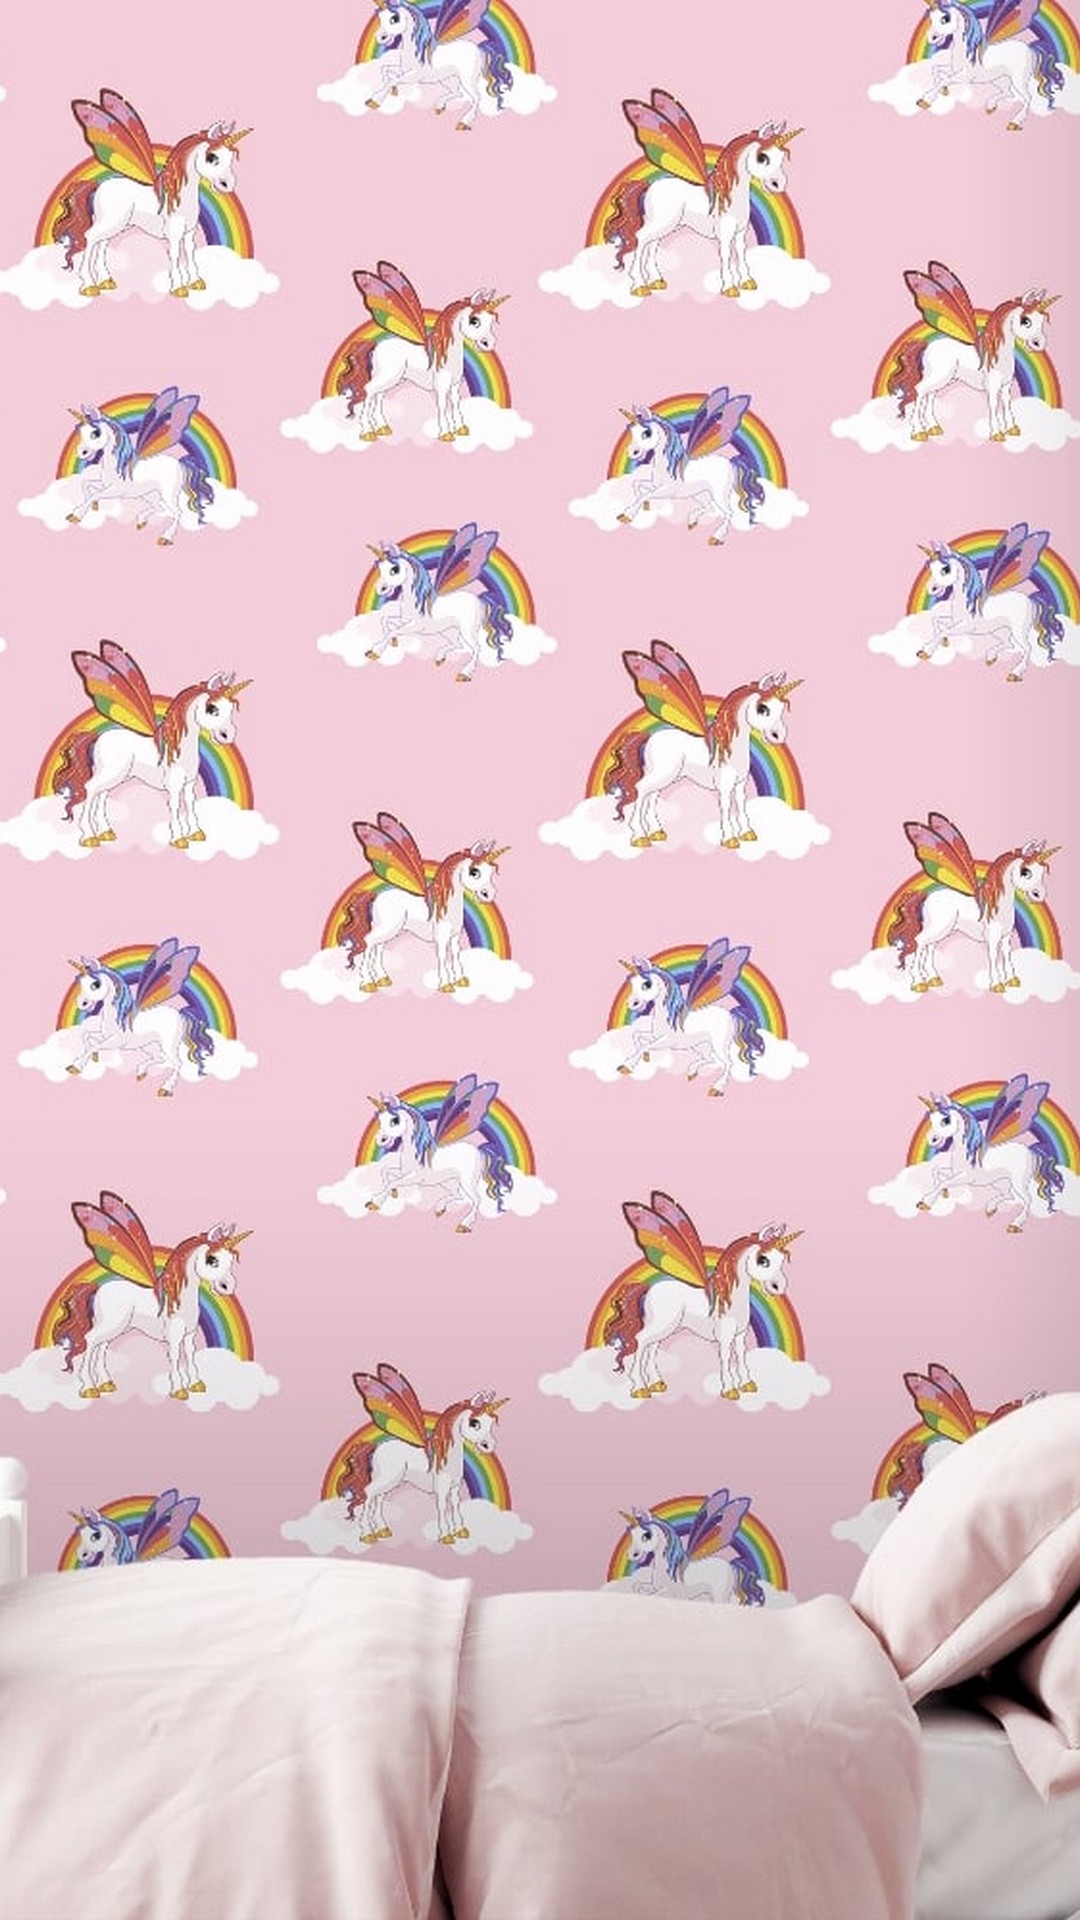 Cute Unicorn iPhone X Wallpaper HD with high-resolution 1080x1920 pixel. Download all Mobile Wallpapers and Use them as wallpapers for your iPhone, Tablet, iPad, Android and other mobile devices